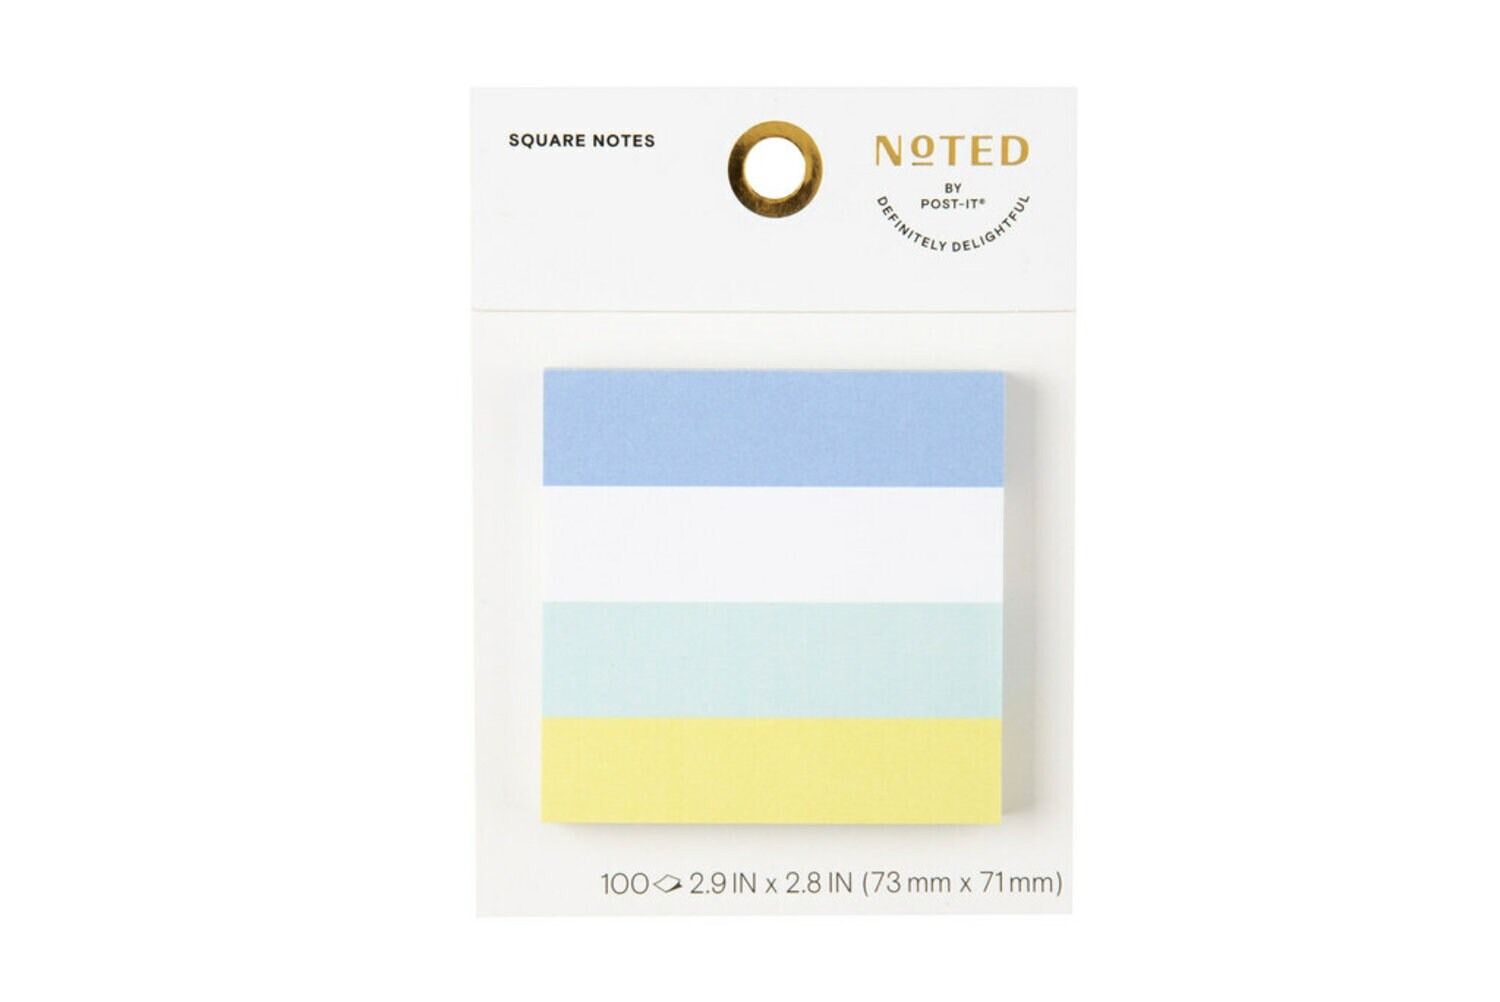 7100264923 - Post-it Printed Notes NTD5-33-ST, 2.9 in x 2.8 in (73 mm x 71 mm)